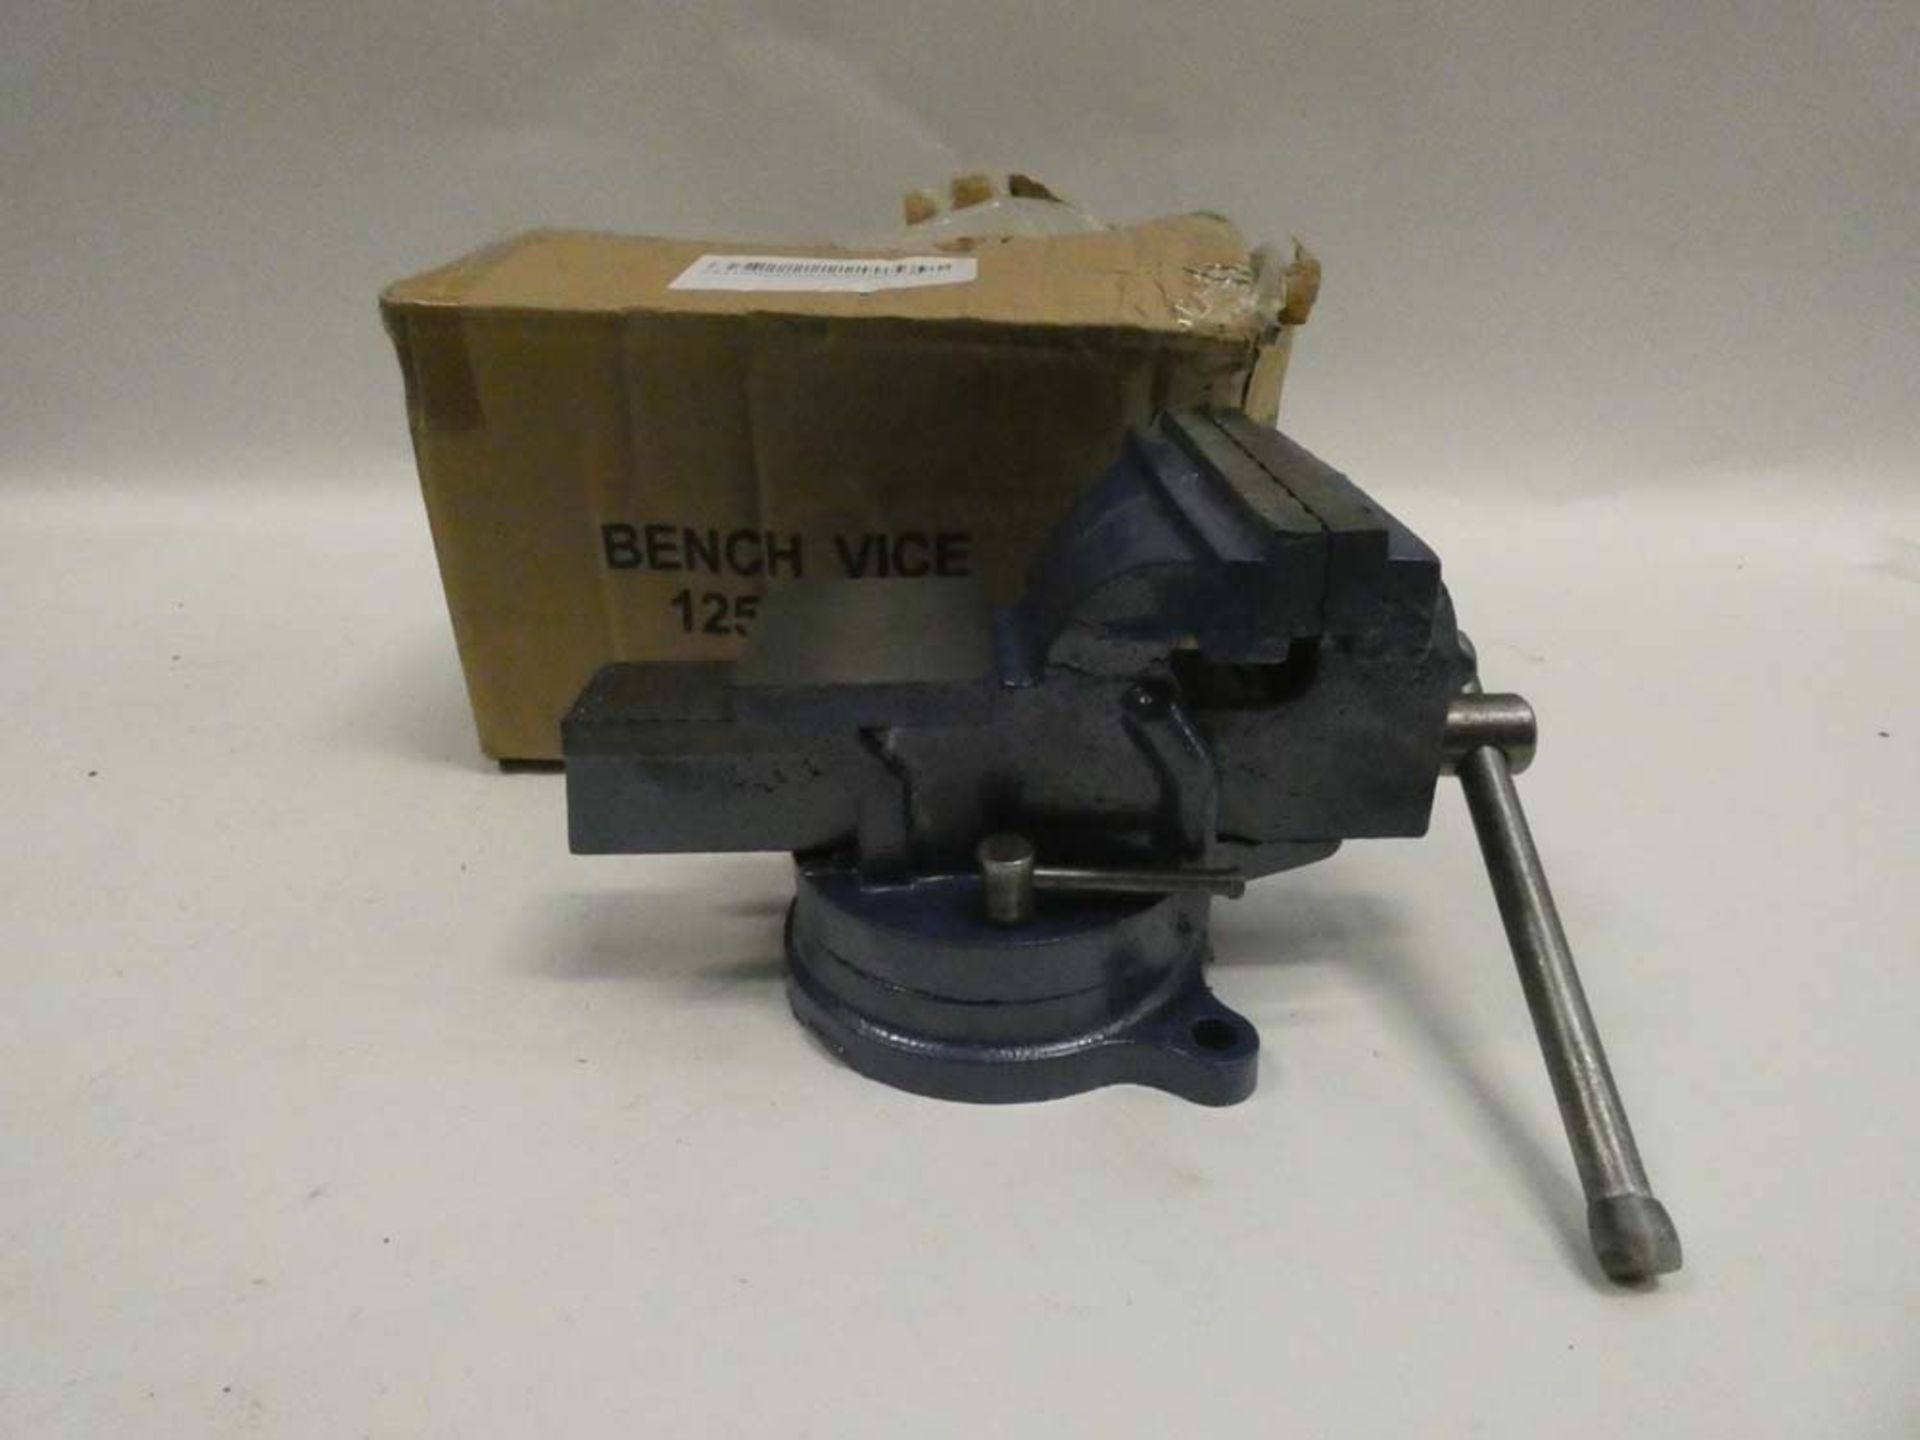 125MM Bench vice in box